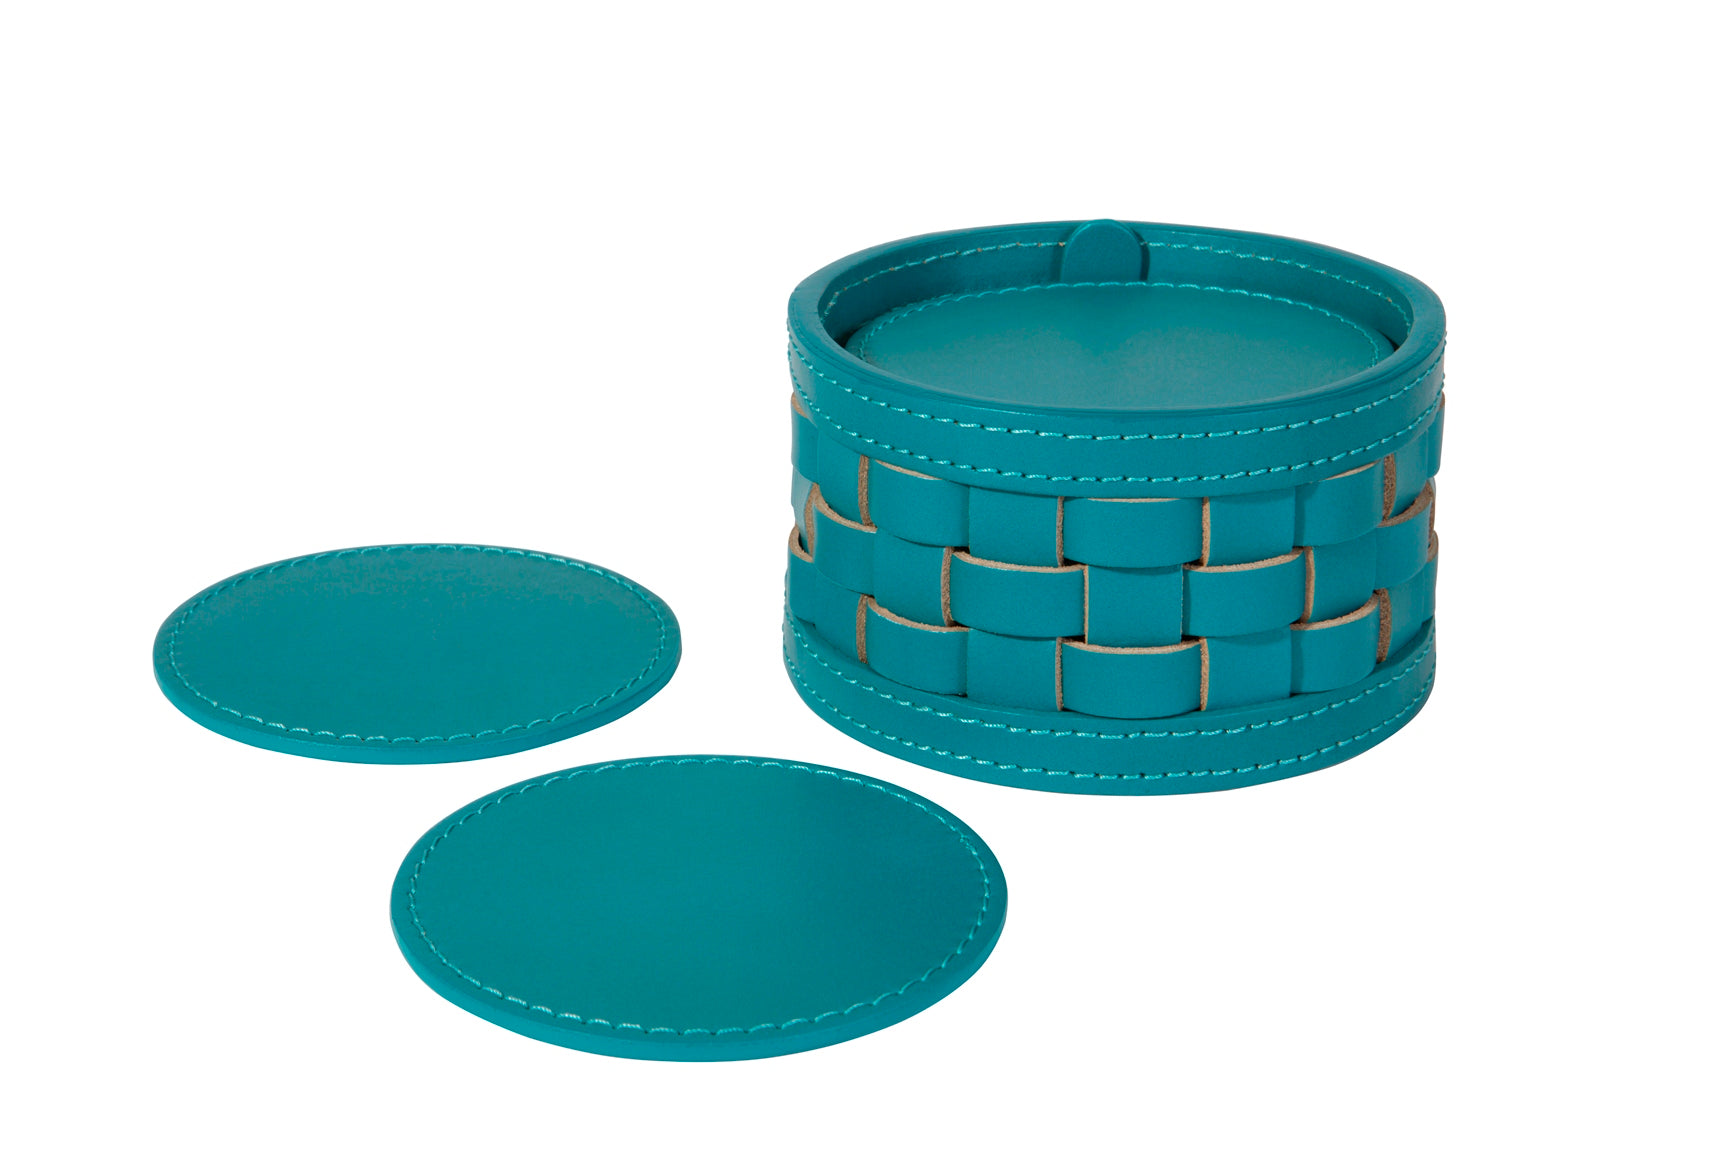 Riviere Barcellona Coaster Holder | Set of 10 Leather Coasters | Presented in a Woven Round Box | Ideal for Yacht Decor | Available at 2Jour Concierge, #1 luxury high-end gift & lifestyle shop